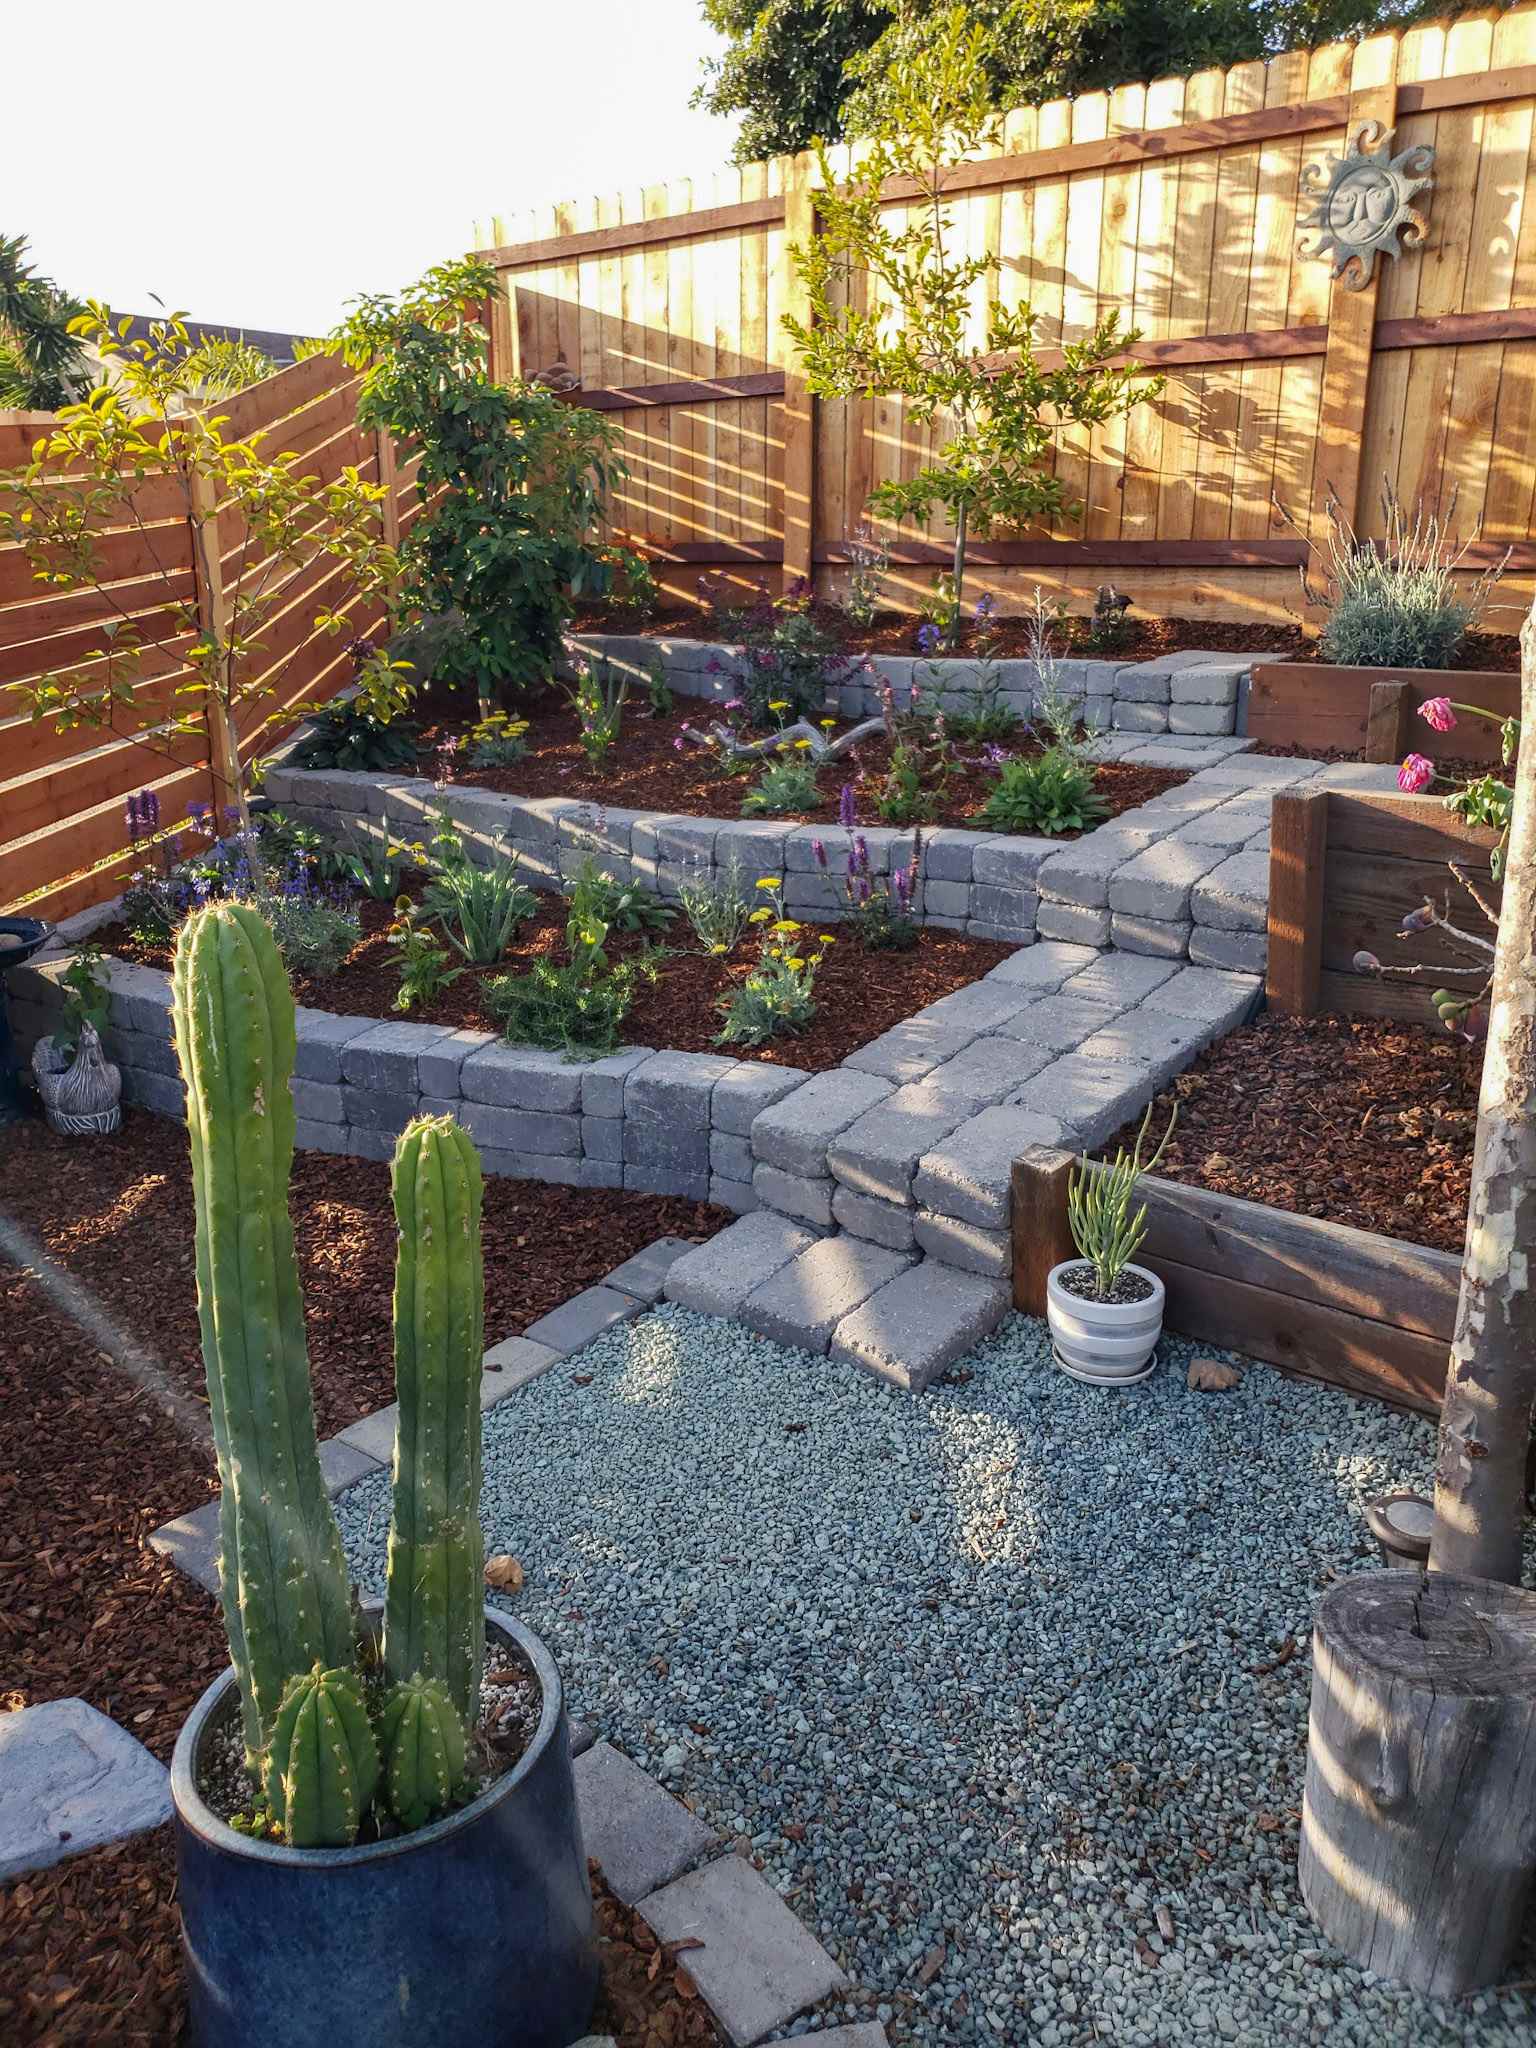 A stone terraced corner of a yard that is three tiers tall with various perennial plants and fruit tree planted in each tier. The backdrop is a fence along the back and side of the terrace. A large cactus in a ceramic pot takes up a portion of the foreground. There are pavers made into a landing/steps that lead up to the different levels of the terrace. The sun is shining in casting rays onto the fence in the background. 